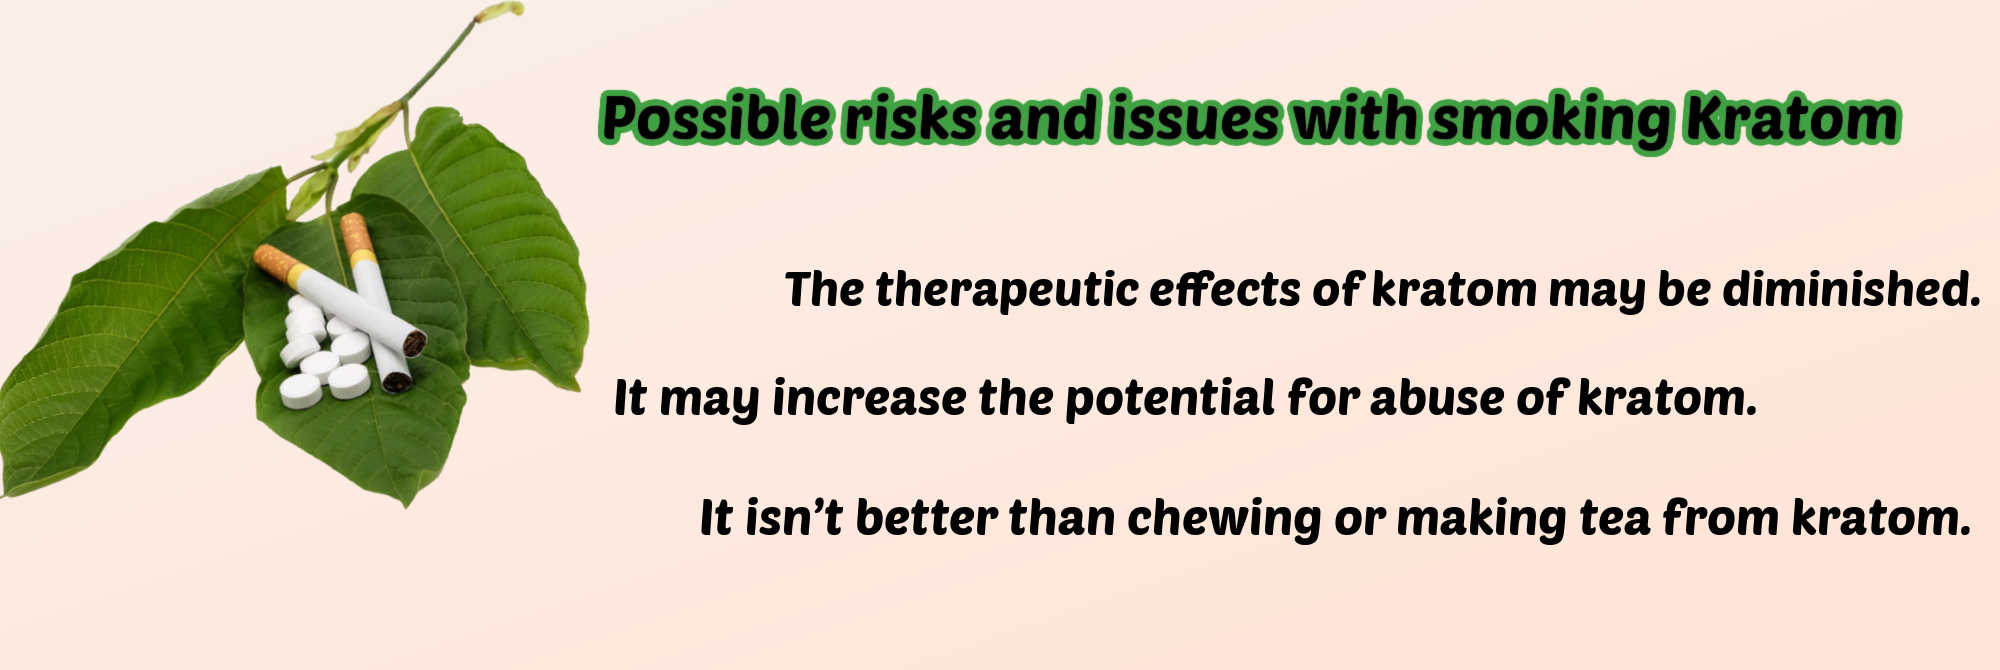 image of possible risks and issues with smoking kratom